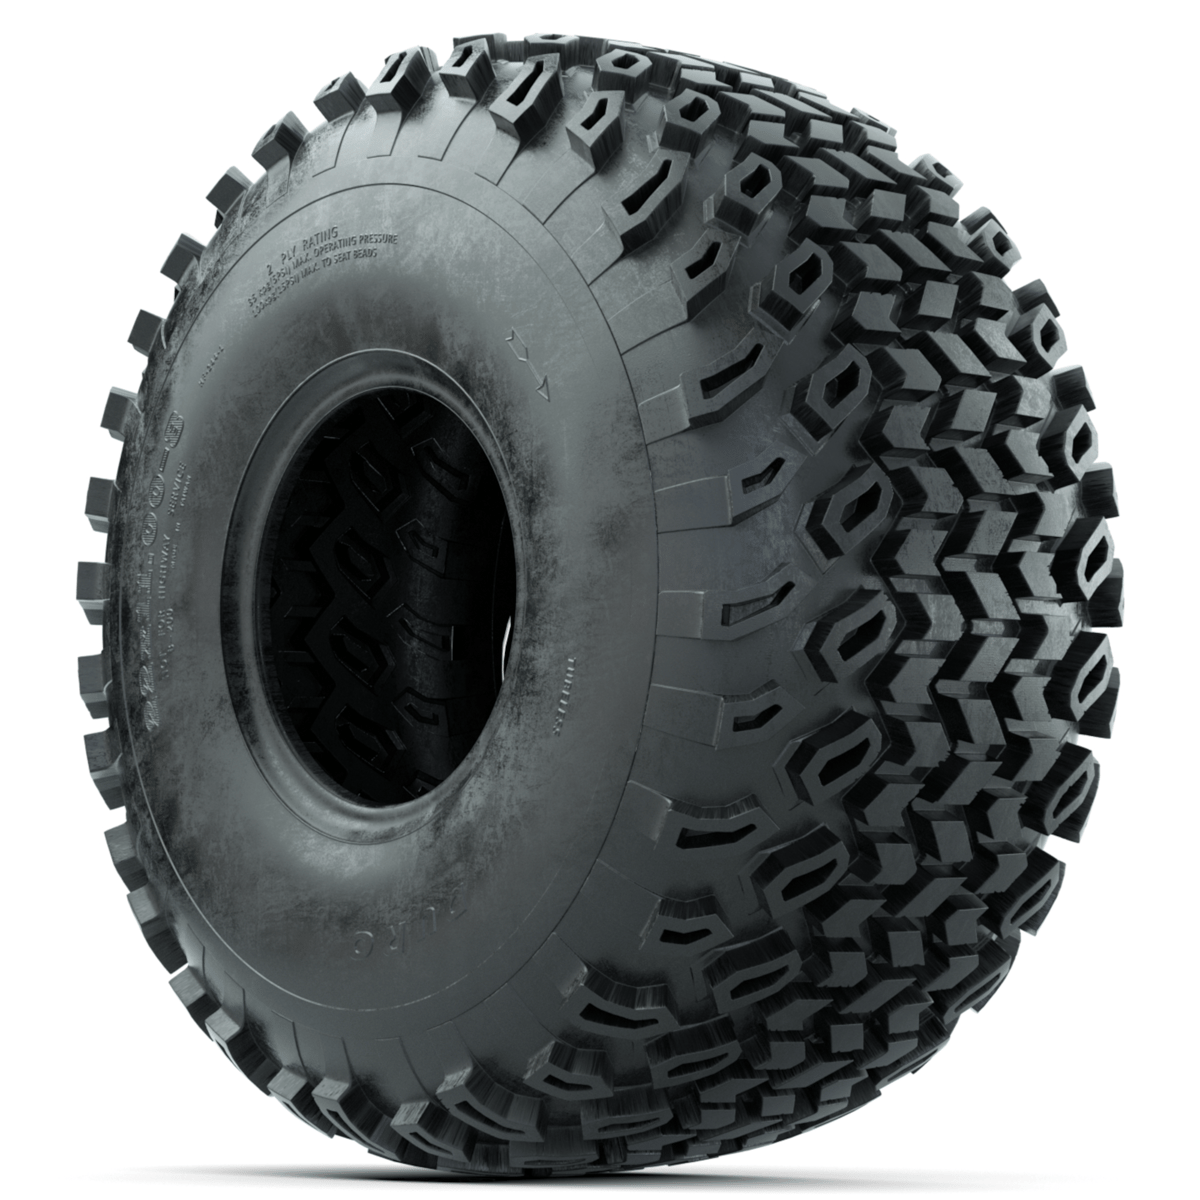 22x11.00-8 Duro Desert A / T Tire (Lift Required)